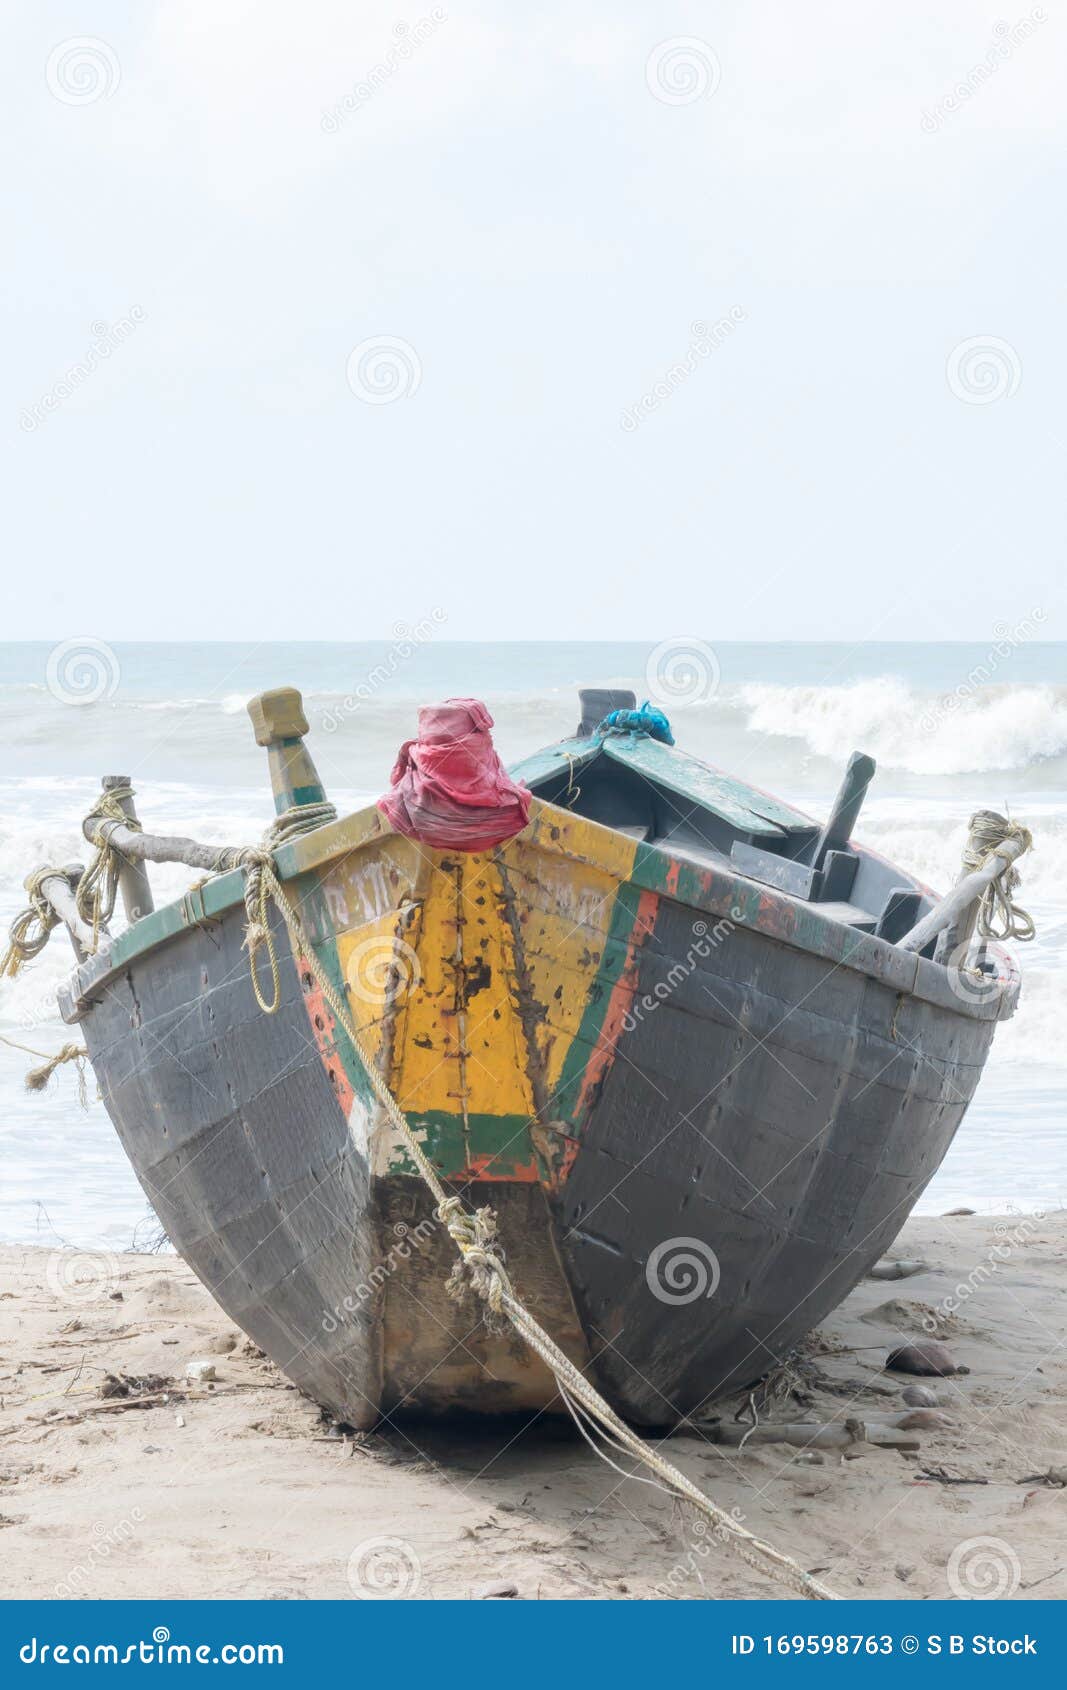 An Abandoned Fishing Boat Trawler Used in Fishing Industry Spotted in a  Commercial Dock Near Riverbank Arena in a Remote Location Stock Image -  Image of pier, people: 169598763